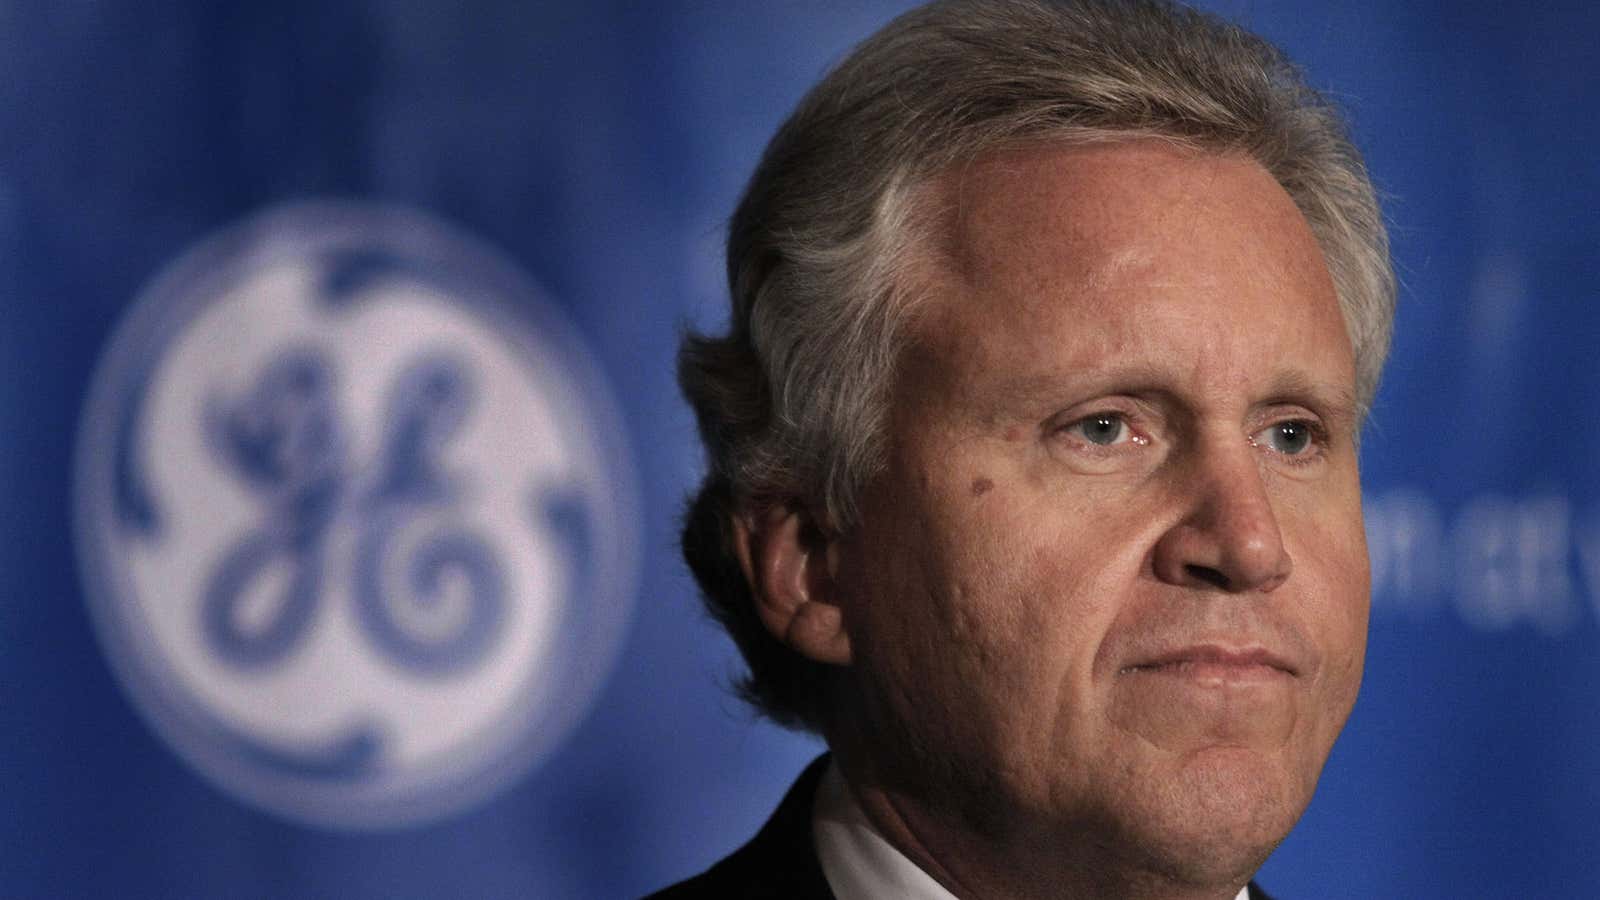 In 2008 GE CEO Jeff Immelt tried to sell the company’s appliance business; now, he’s ramping up US manufacturing at Appliance Park in Kentucky.